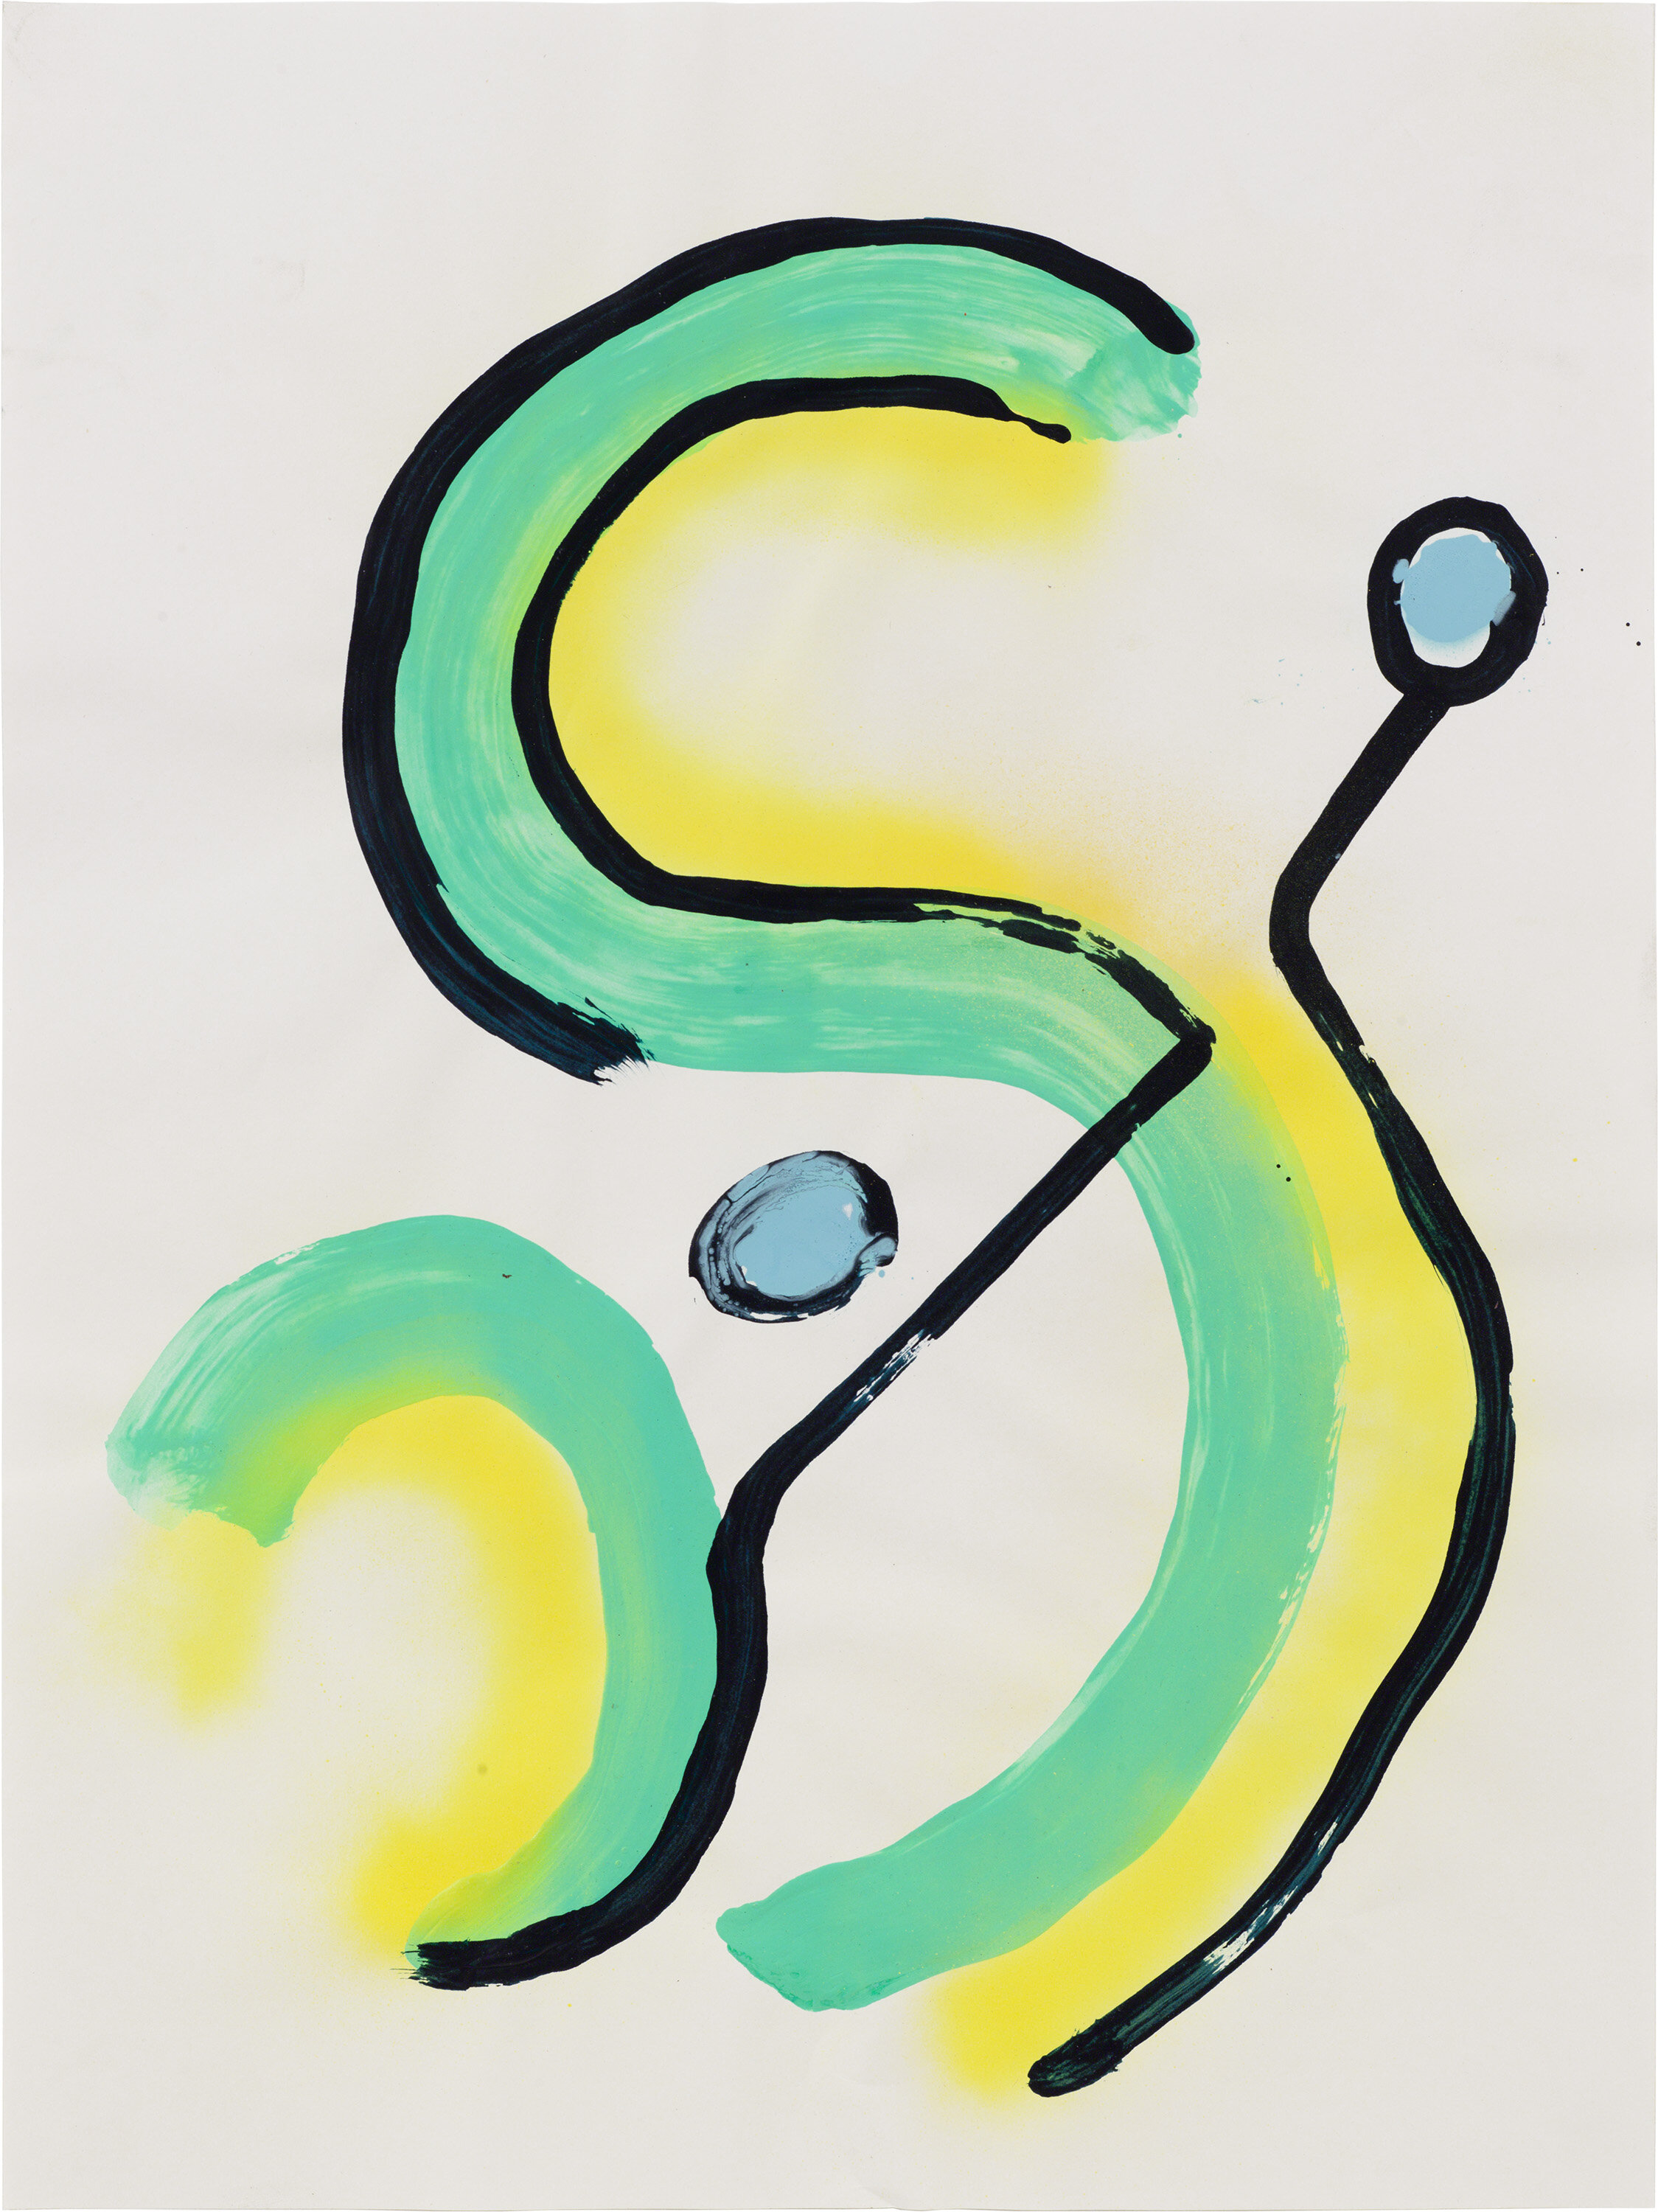  Drew Beattie and Ben Shepard   DBBS-DRW-2015-212   2015  acrylic and spray paint on paper  24 x 18 inches 